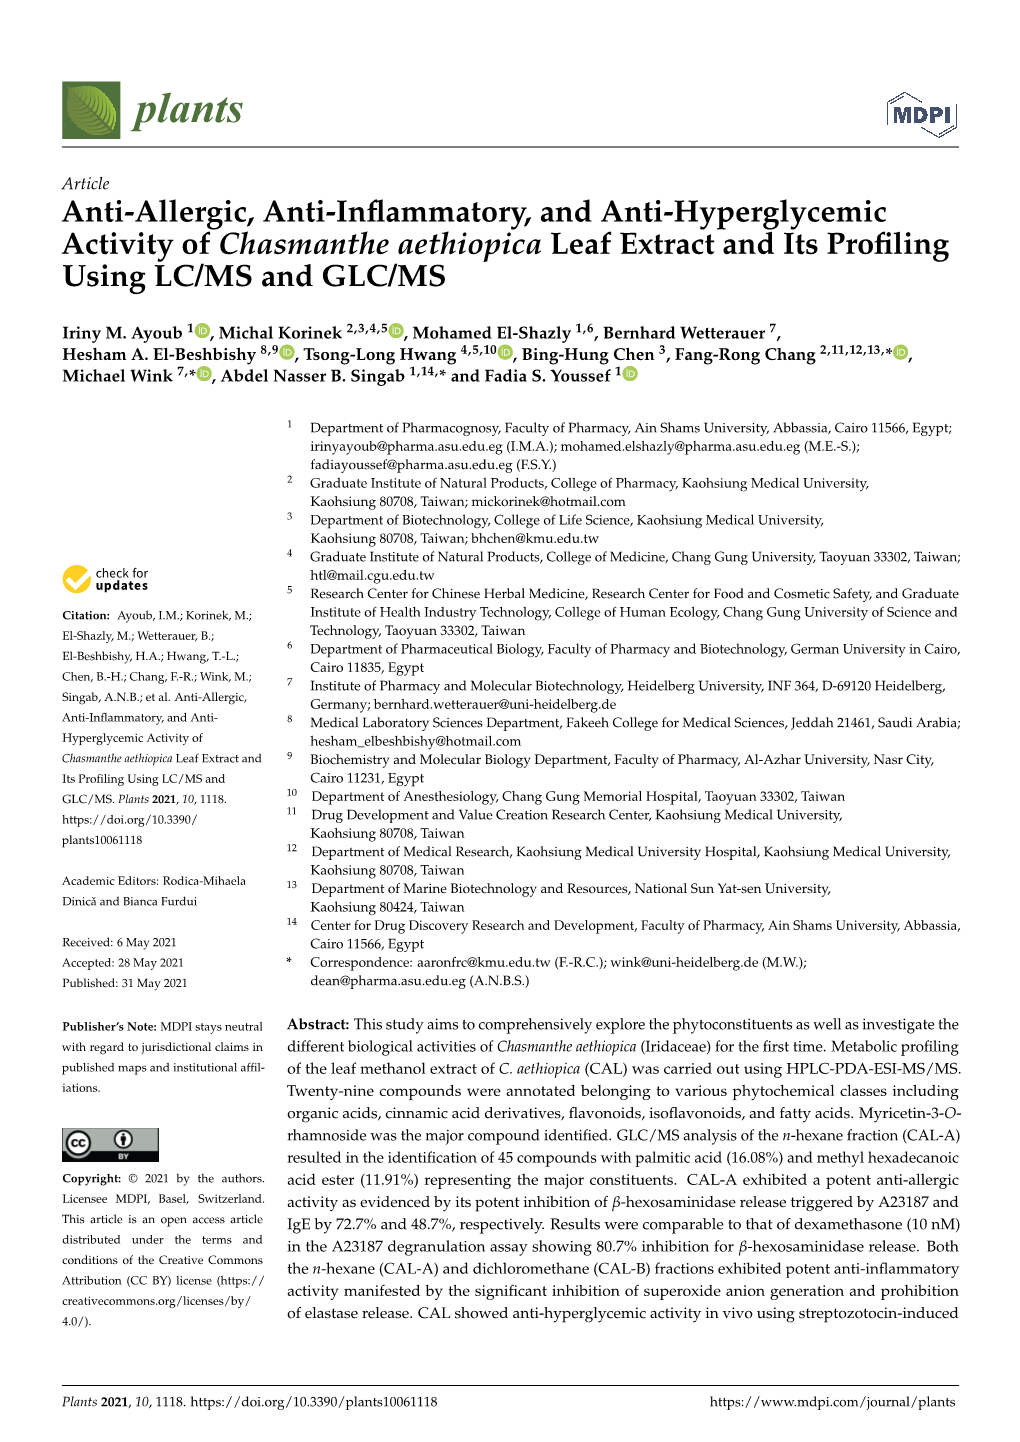 Anti-Allergic, Anti-Inflammatory, and Anti-Hyperglycemic Activity of Chasmanthe Aethiopica Leaf Extract and Its Profiling Using